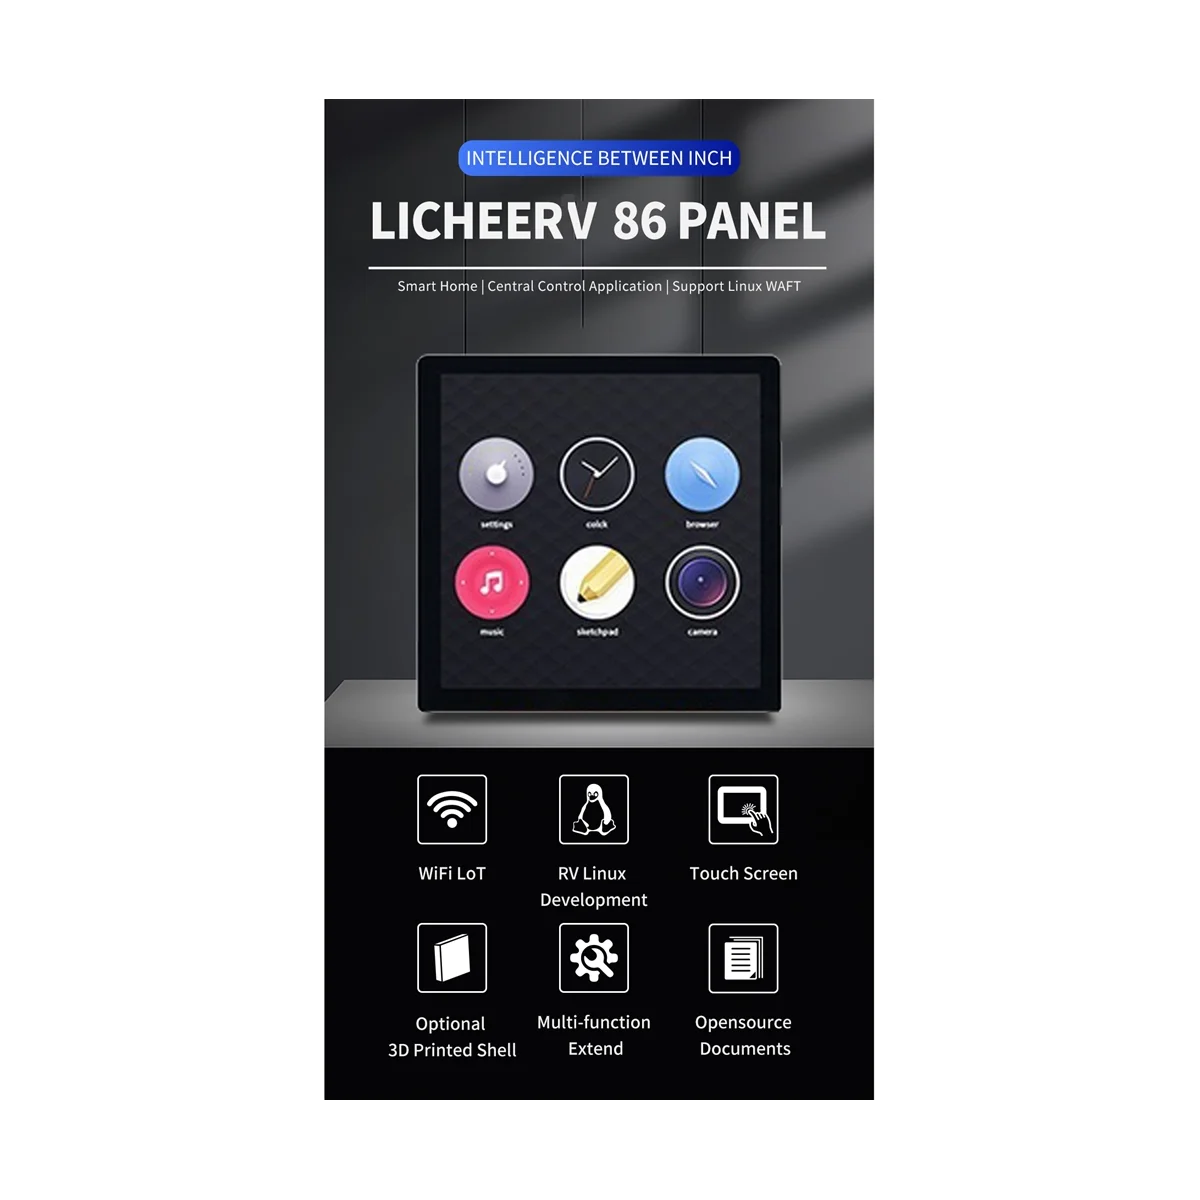 

For Sipeed Lichee RV 86 Panel Smart Home Central Control 512MB RAM D1 Development Board Linux with 4 Inch Touch Screen